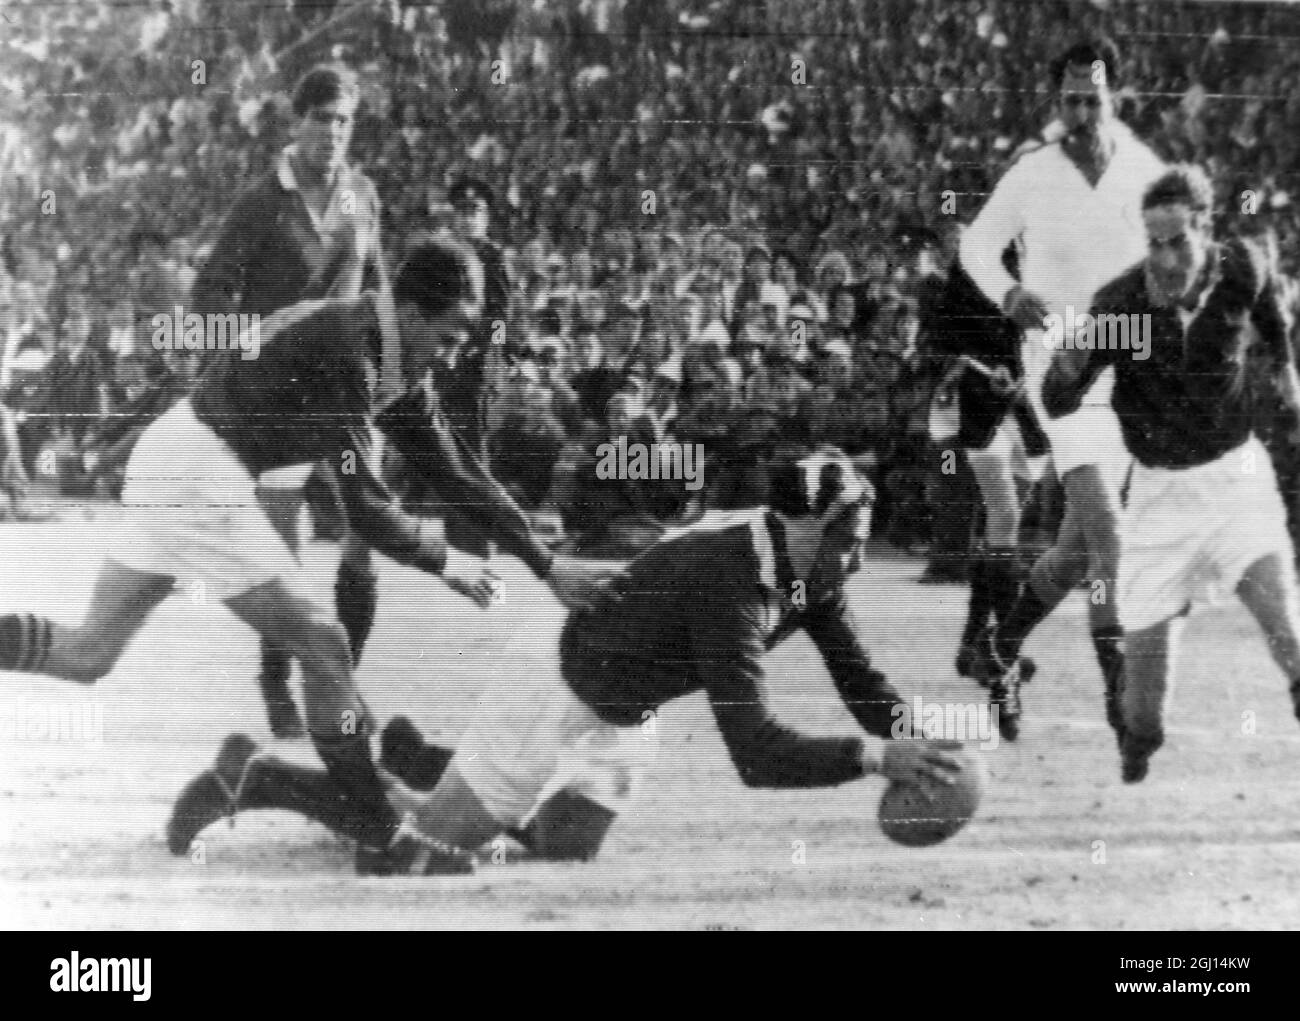 RUGBY GB LIONS V SA CAMPBELL-LAMBERTON PARTITIONS ; 25 AOÛT 1962 Banque D'Images